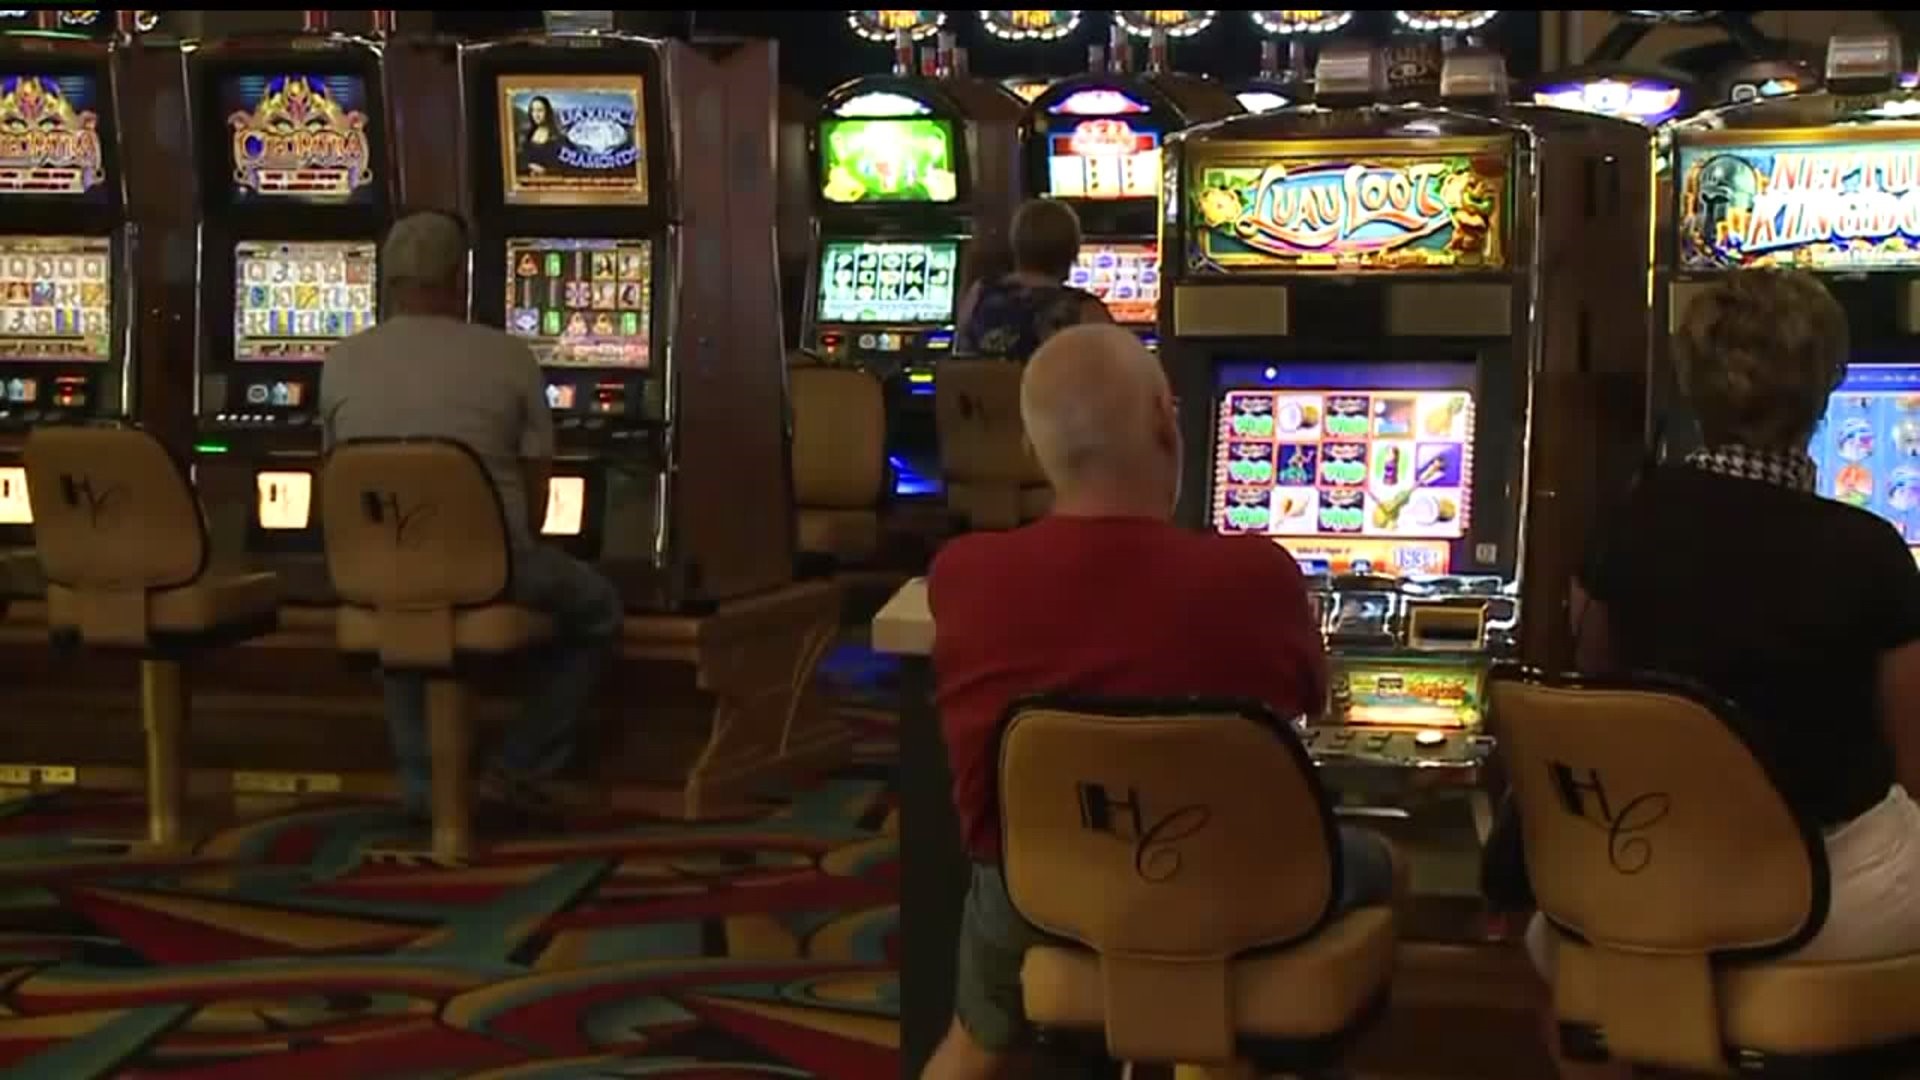 Learn the `ABCs of VGTs`: Video gaming terminals pushed for Pa. budget